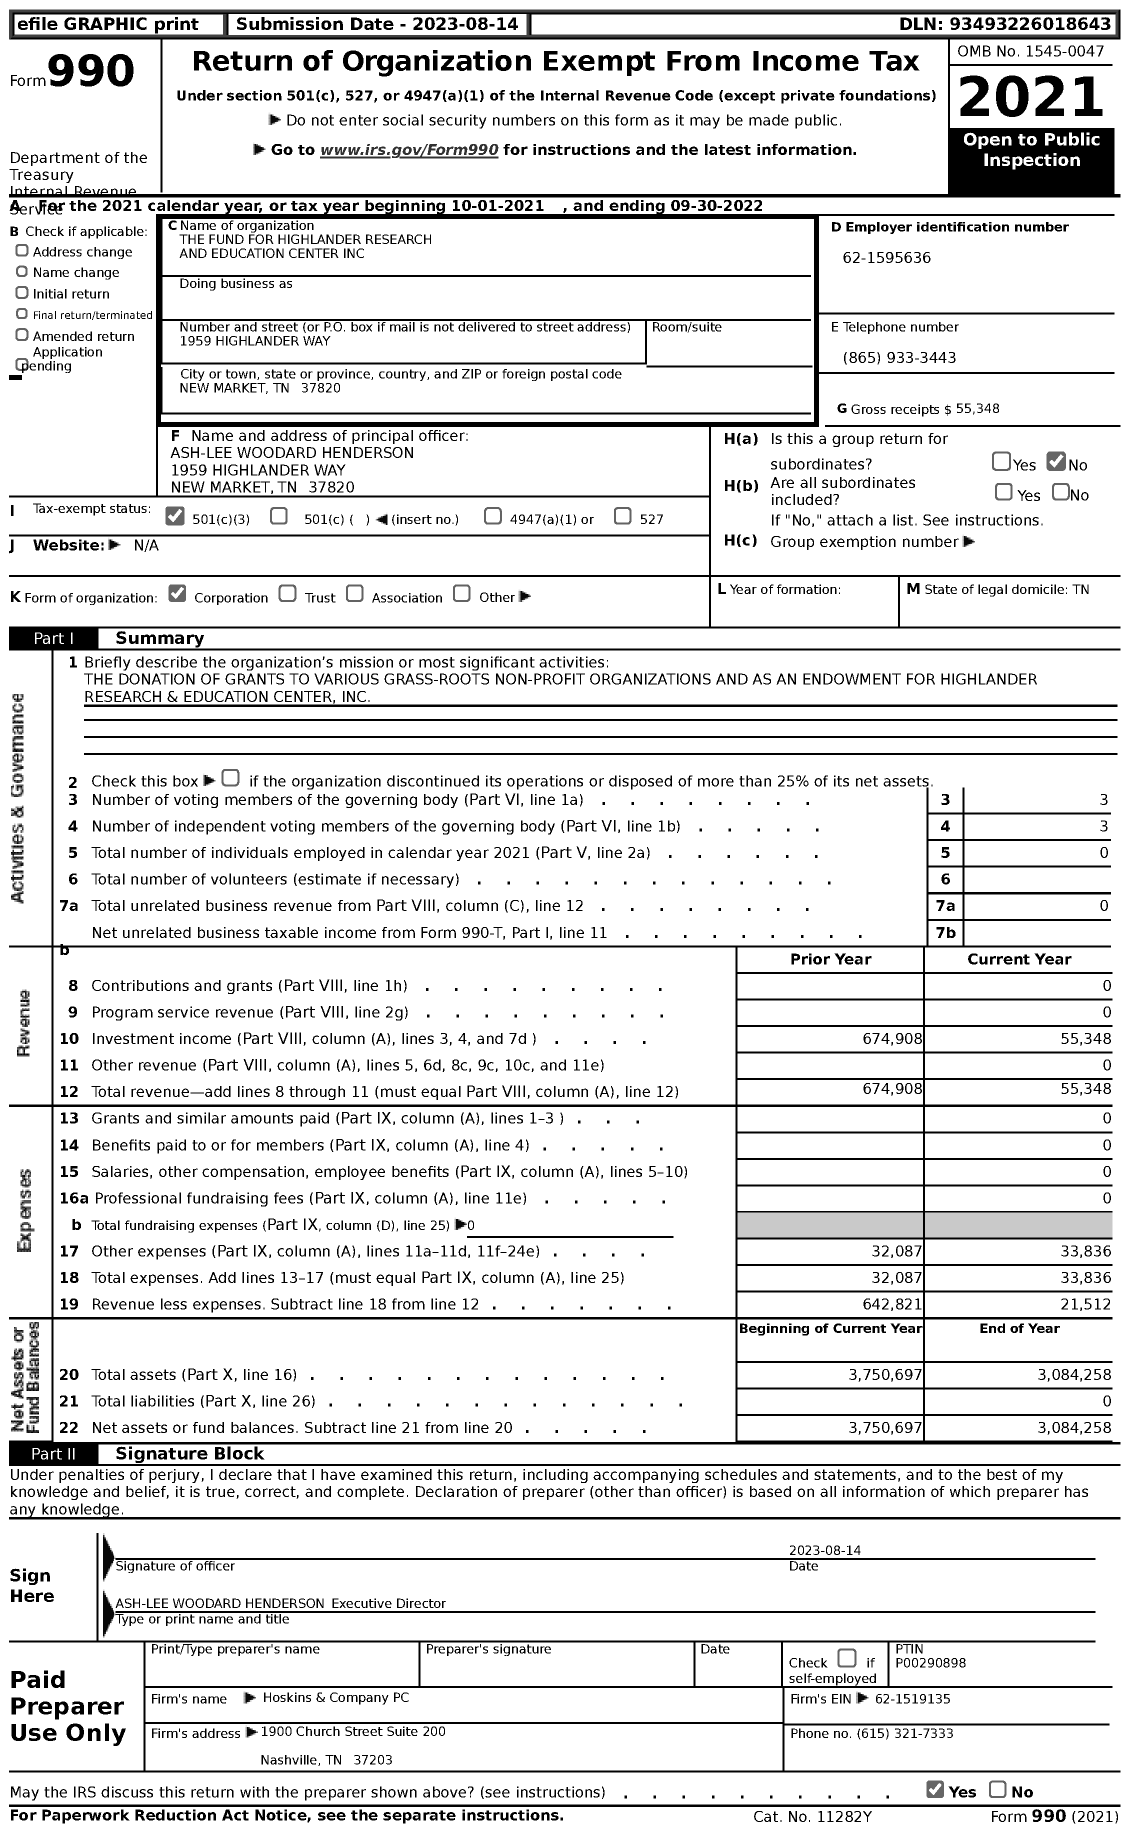 Image of first page of 2021 Form 990 for The Fund for Highlander Research and Education Center